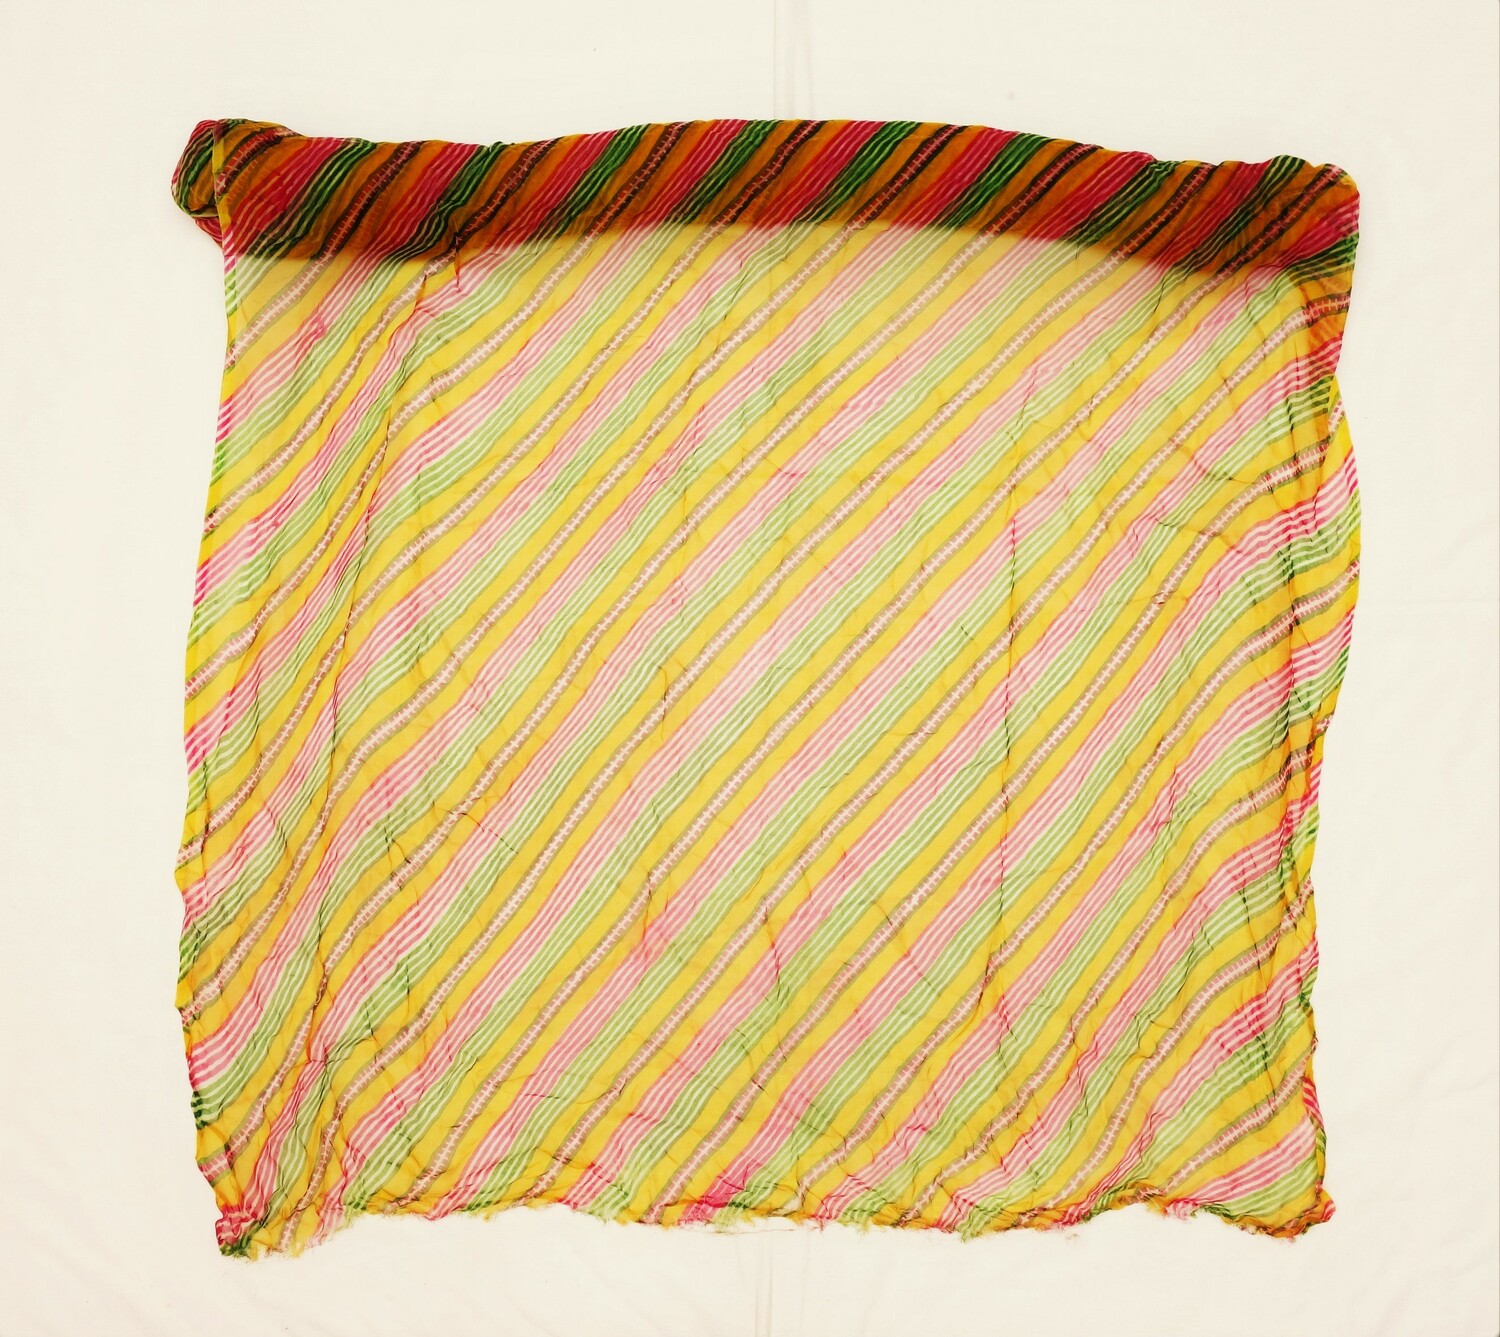 Long length of leheriya cloth with a colourful design of zig-zags in various widths and bright colours. Udaipur, Rajasthan, India (TRC 2022.2118).